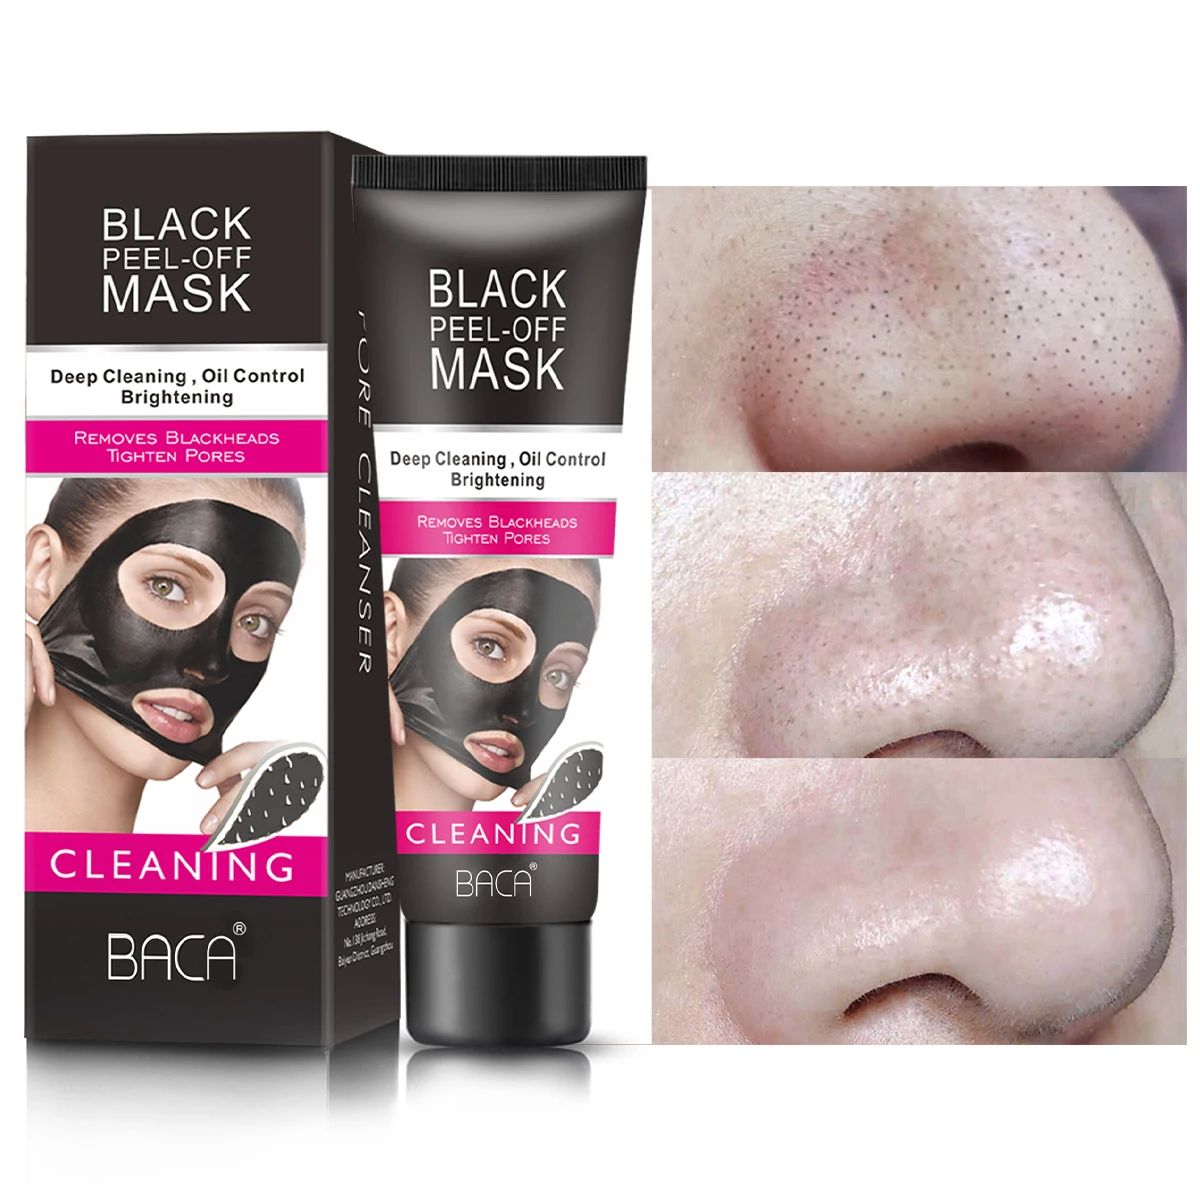 

Popular charcoal face mask charcoal powder Deep Cleansing Purifying Peel Off Blackhead Black Mud Mask